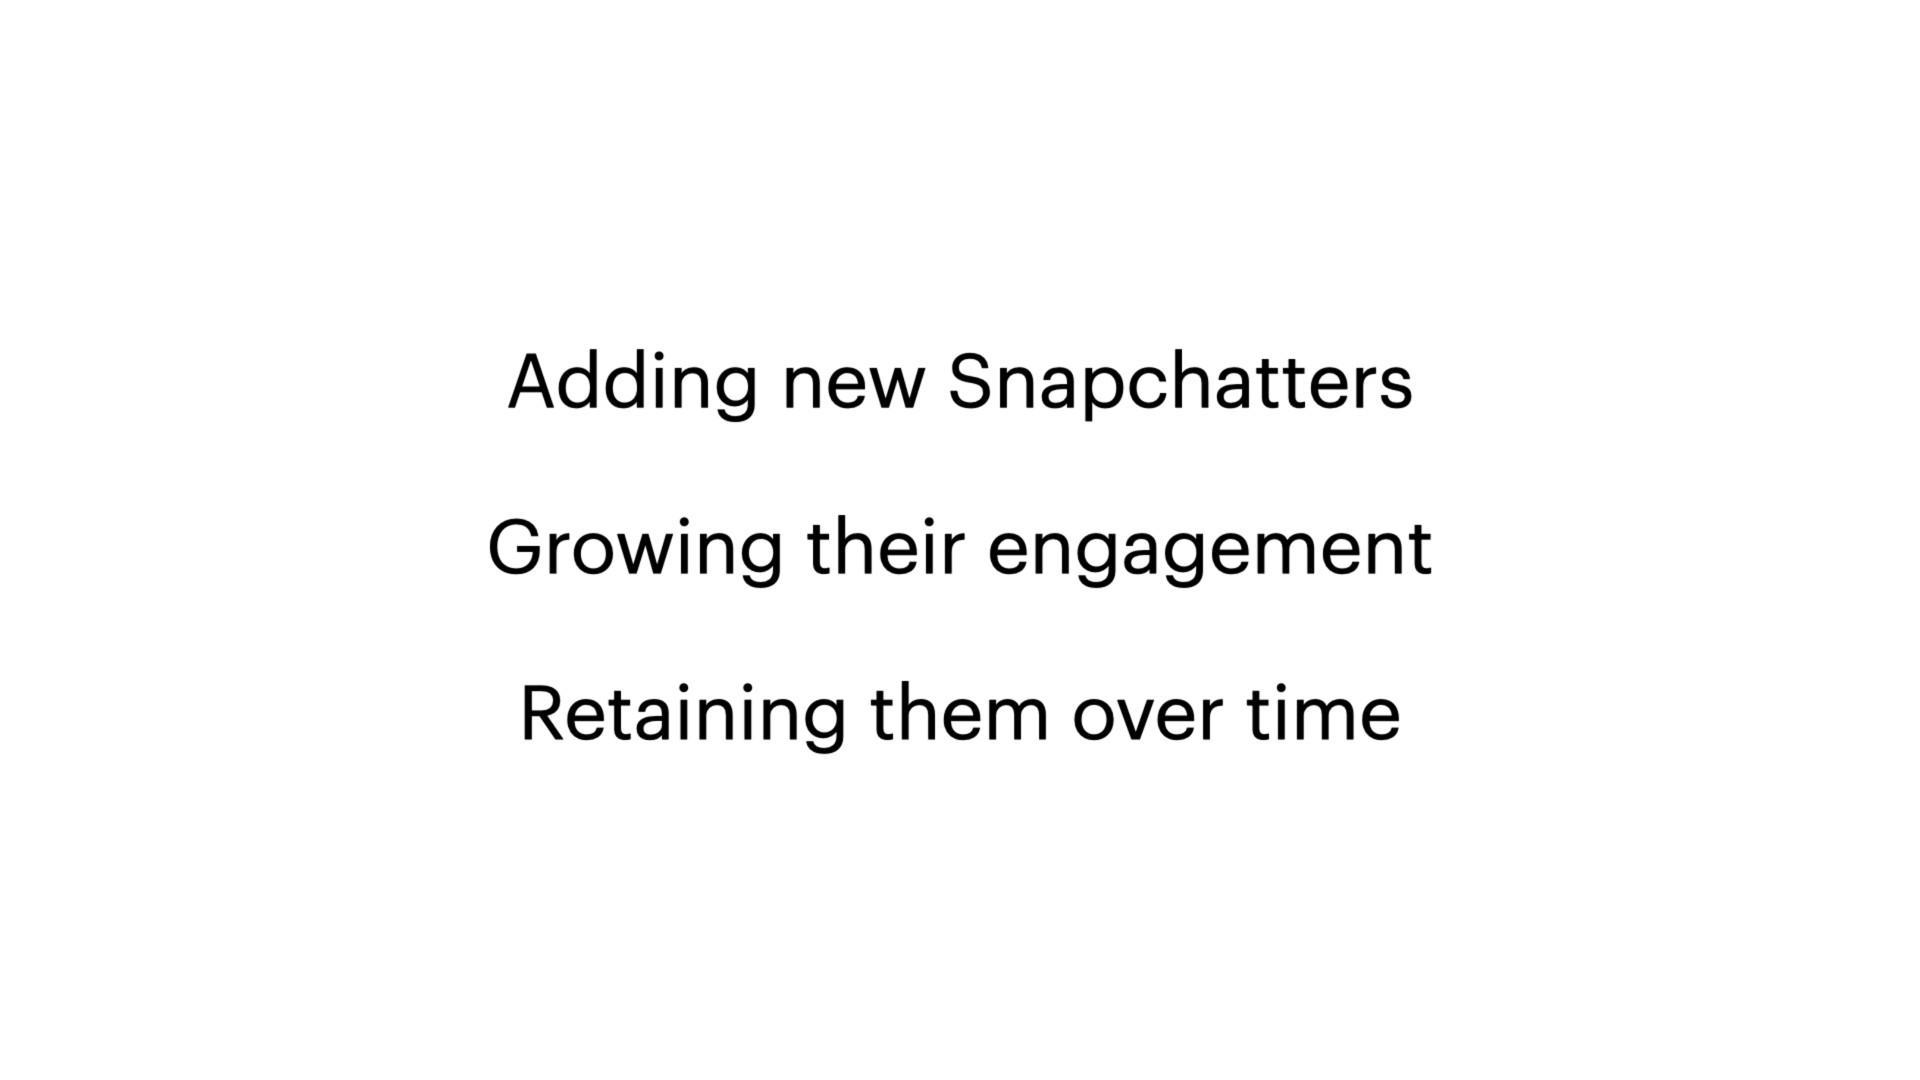 adding new growing their engagement retaining them over time | Snap Inc